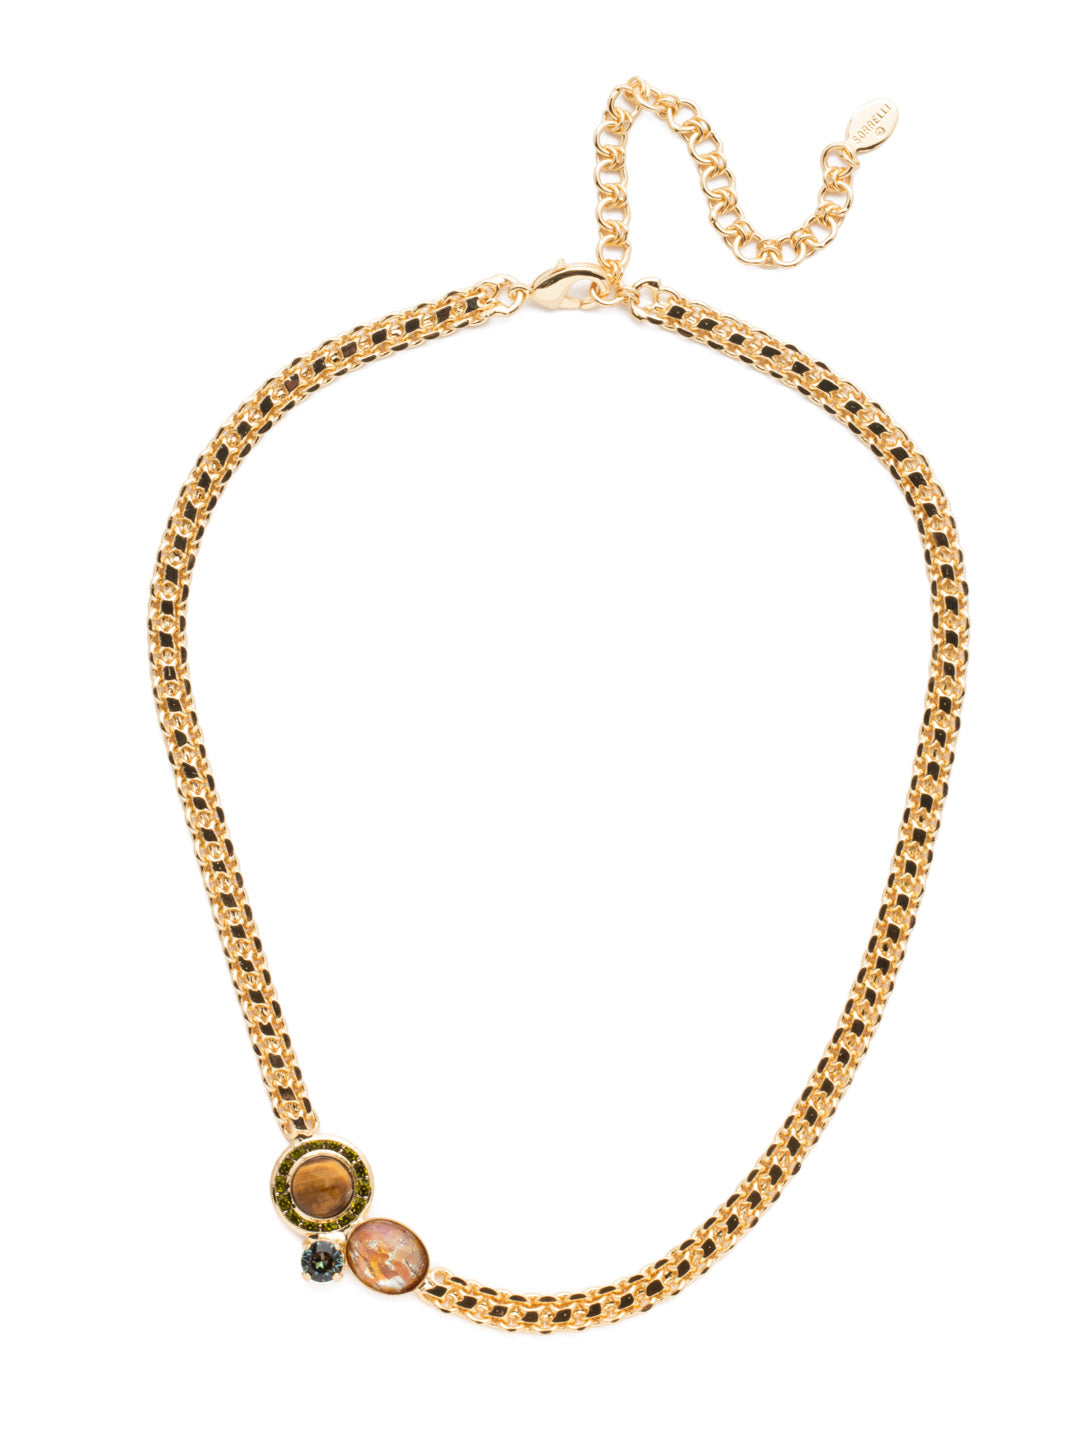 Hartford Tennis Necklace - NET13BGCSM - The Hartford Tennis Necklace is truly unique. The bold metal chain is offset by an off-center cluster of opaque and sparkling stones and crystals. From Sorrelli's Cashmere collection in our Bright Gold-tone finish.